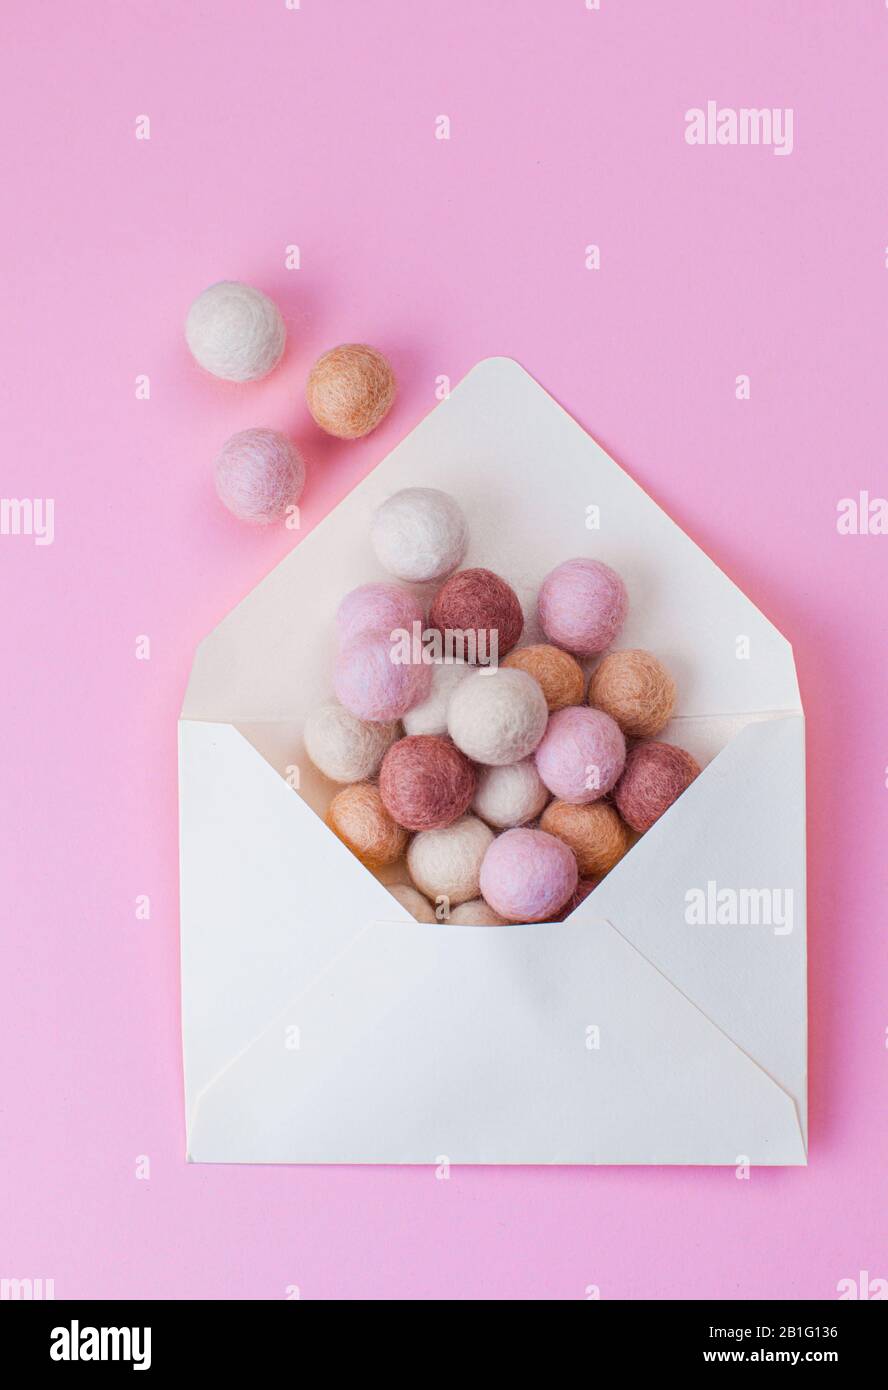 Minimal composition with felt balls flying out from opened envelope over pink background Stock Photo